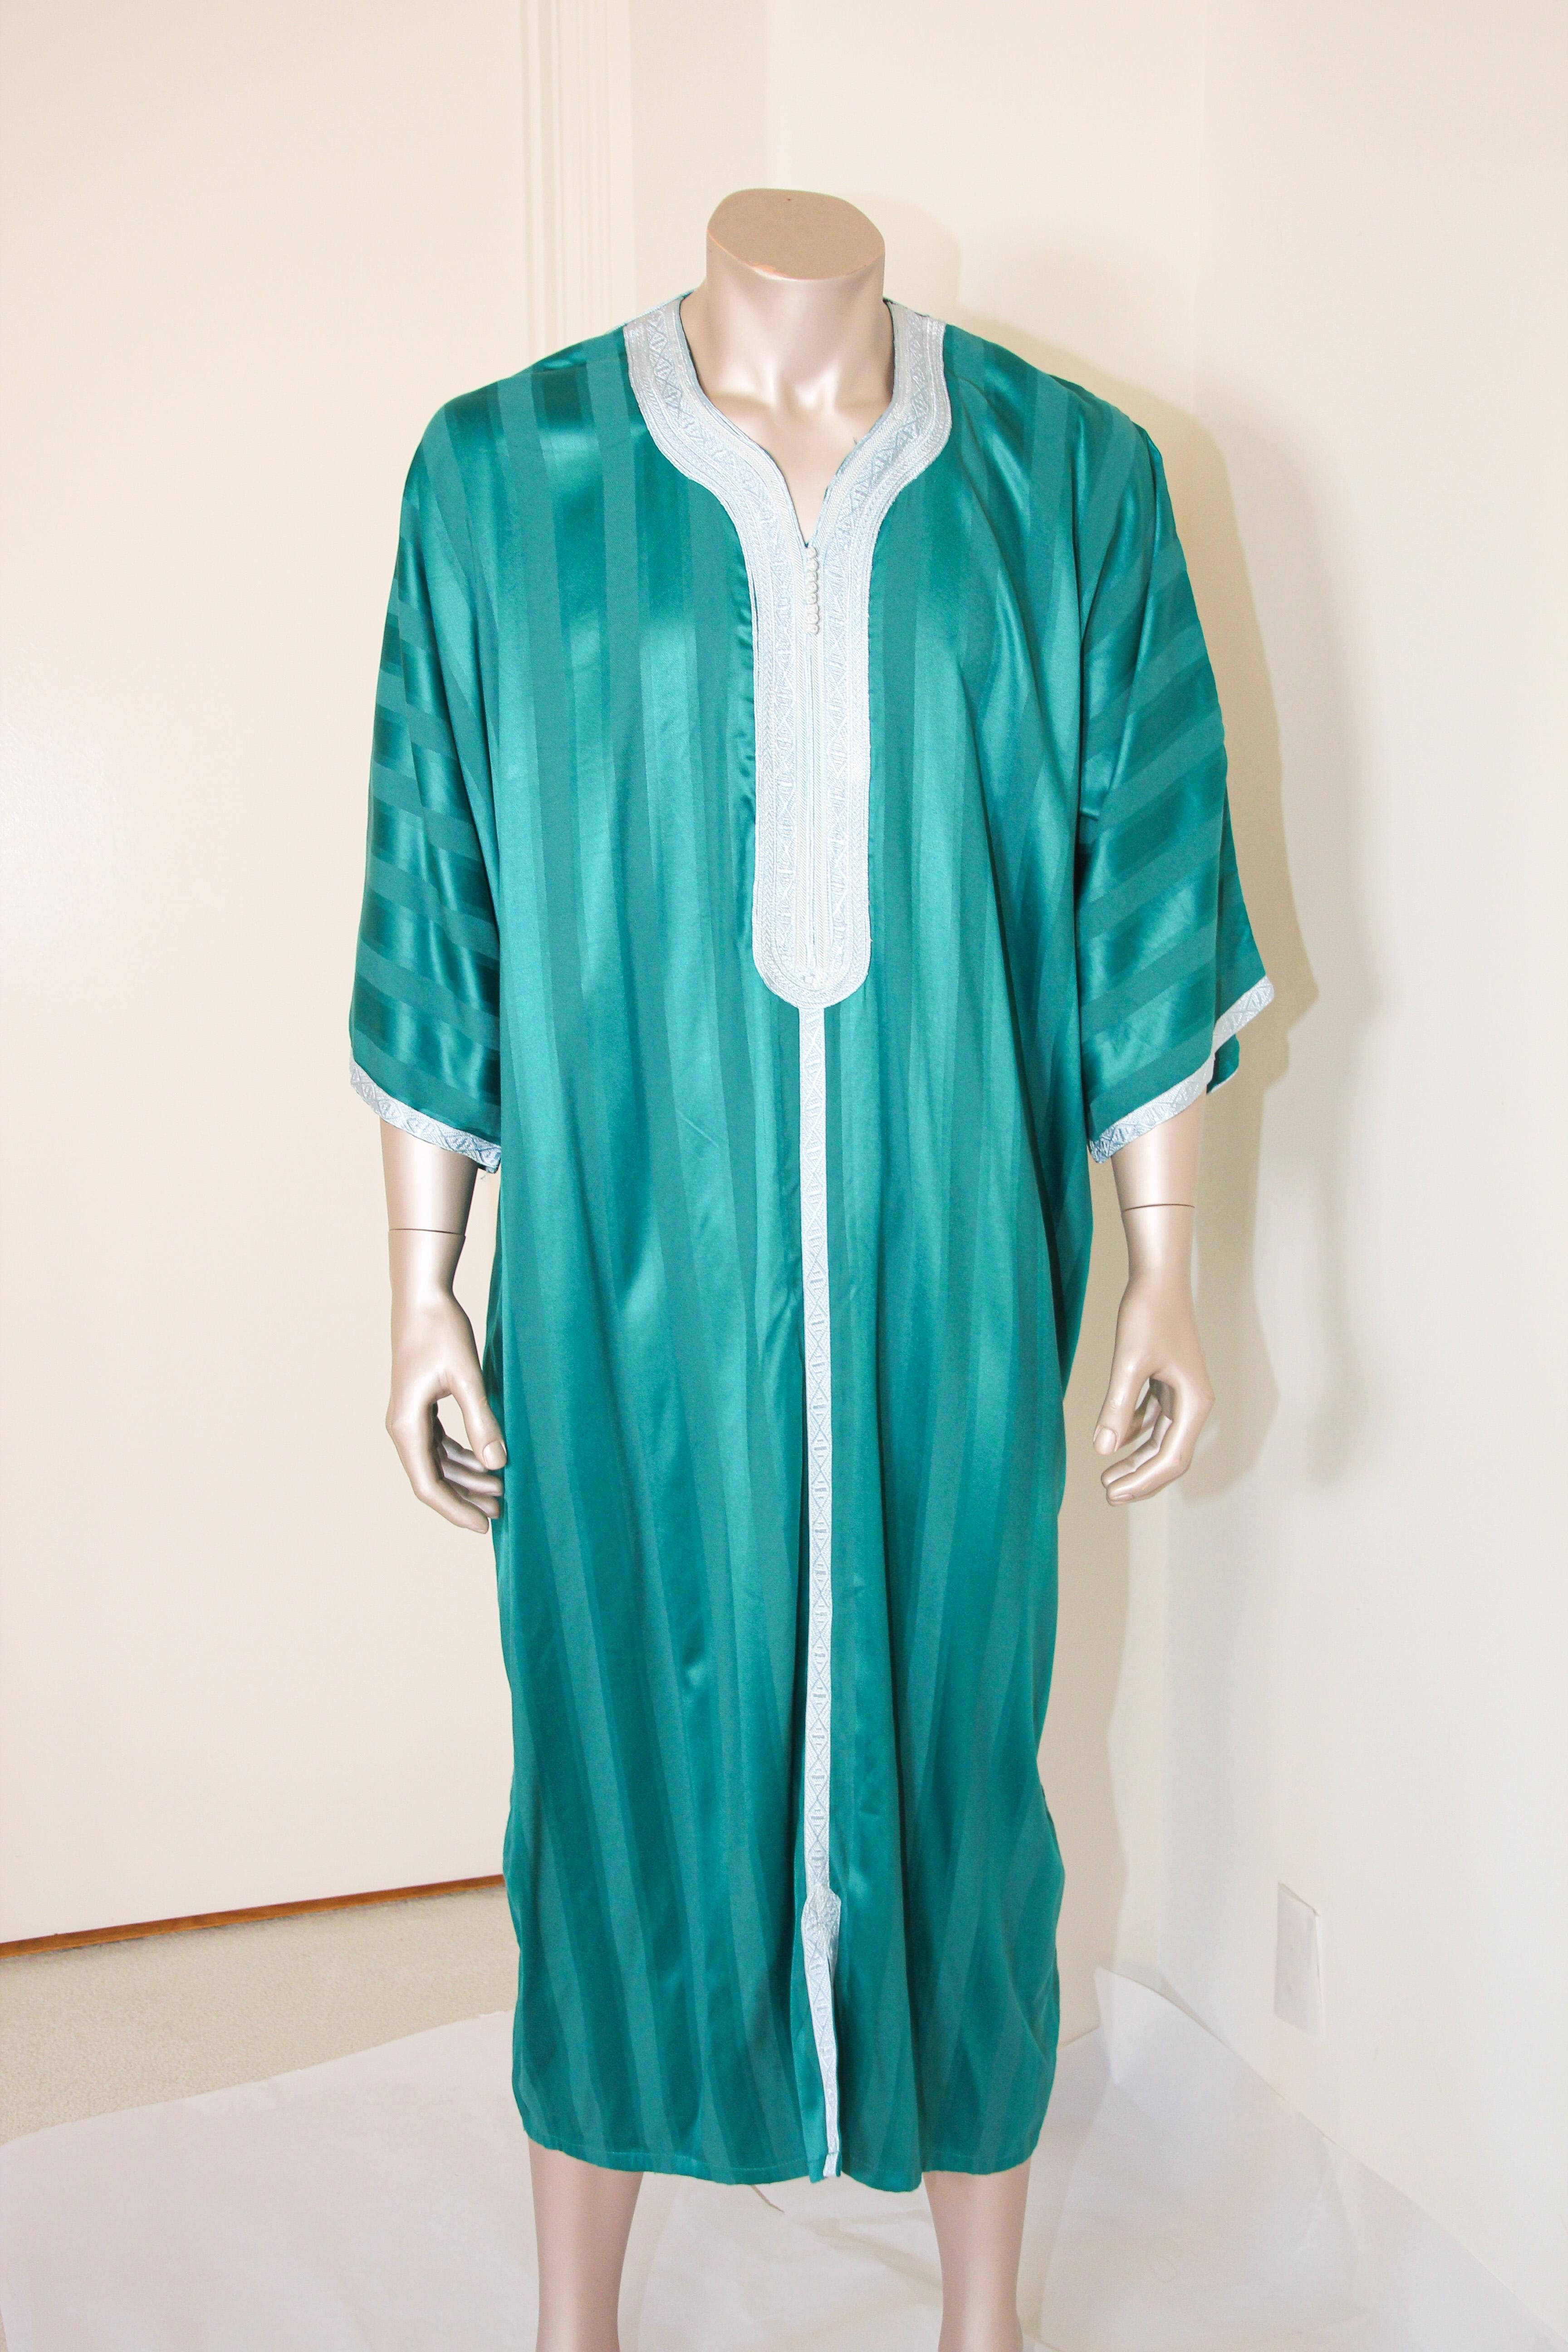 Moroccan gentleman vintage emerald green caftan embellished with embroidered trim.
In Morocco, fashion preserves its traditional style inherited from great civilizations that found their way to Northwest Africa, such as the Ottomans and the